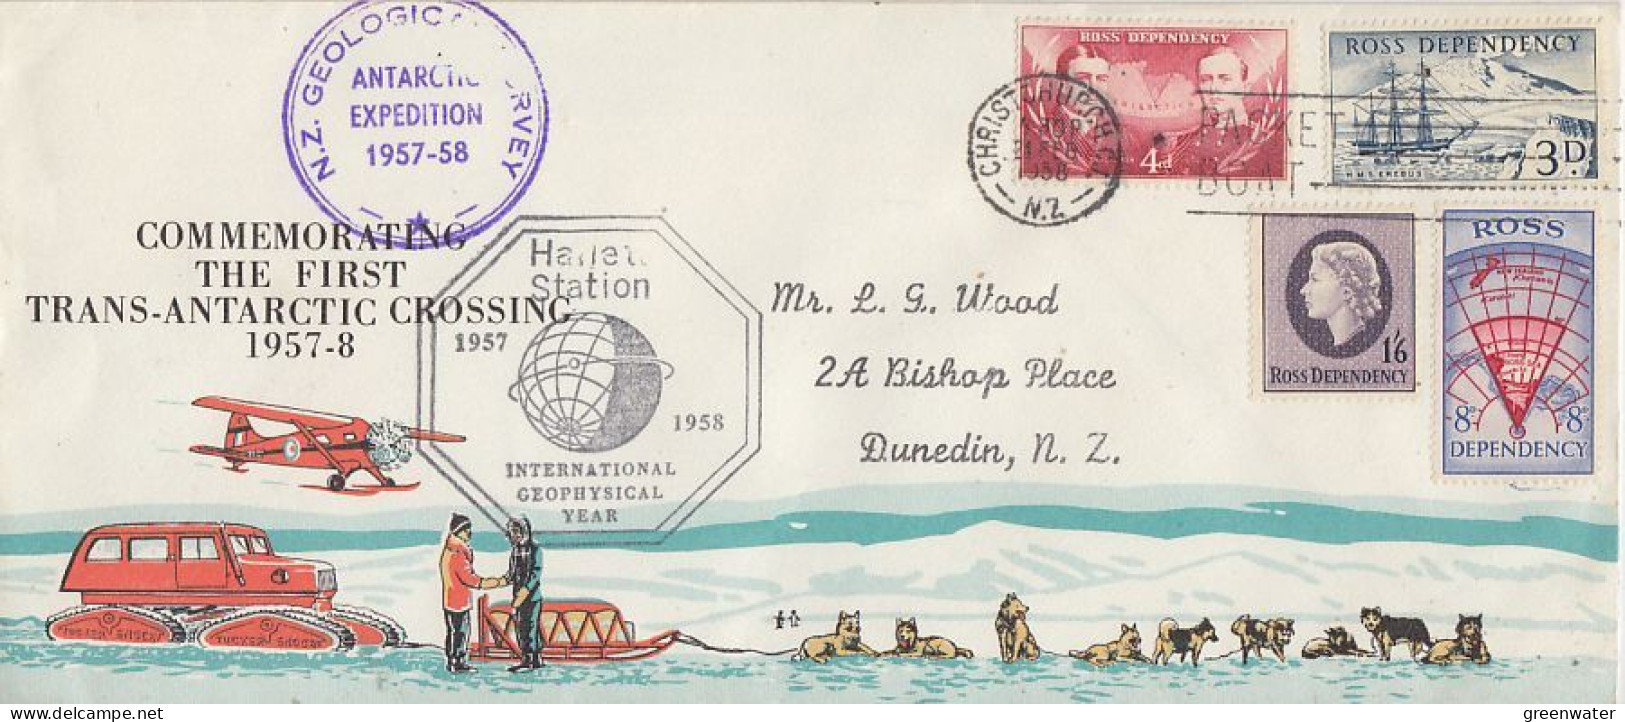 Ross Dependency NZ Antarctic Research Expedition Cape Hallet IGY Ca FEB 1958 (RO17) - Covers & Documents